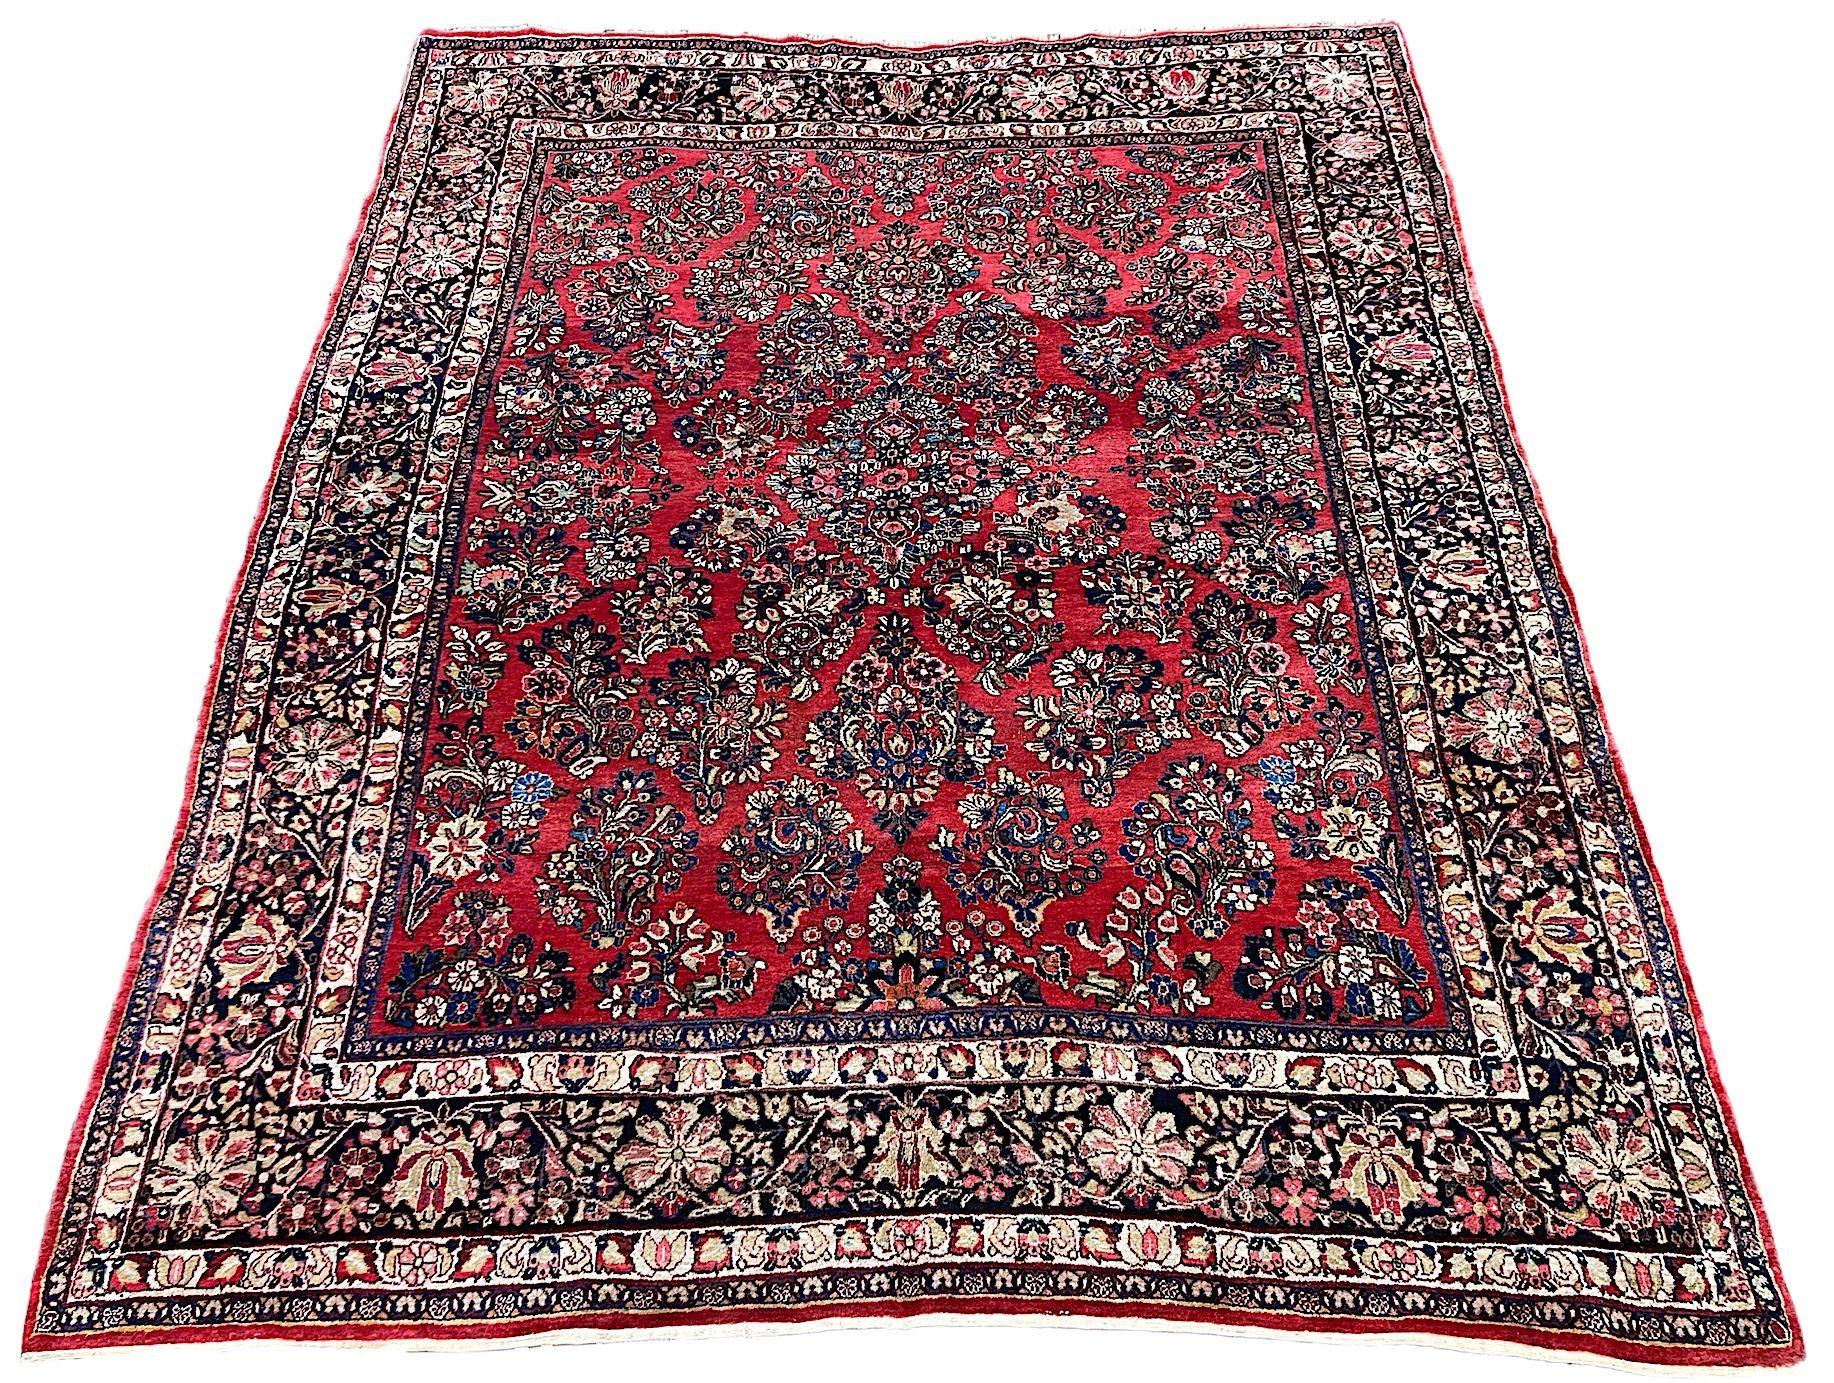 A fabulous antique Sarouk carpet, hand woven circa 1920. The carpet features an allover design of flower bouquets on a terracotta red field surrounded by a charcoal border. Finely woven with soft wool and lovely secondary colours of greens, pinks